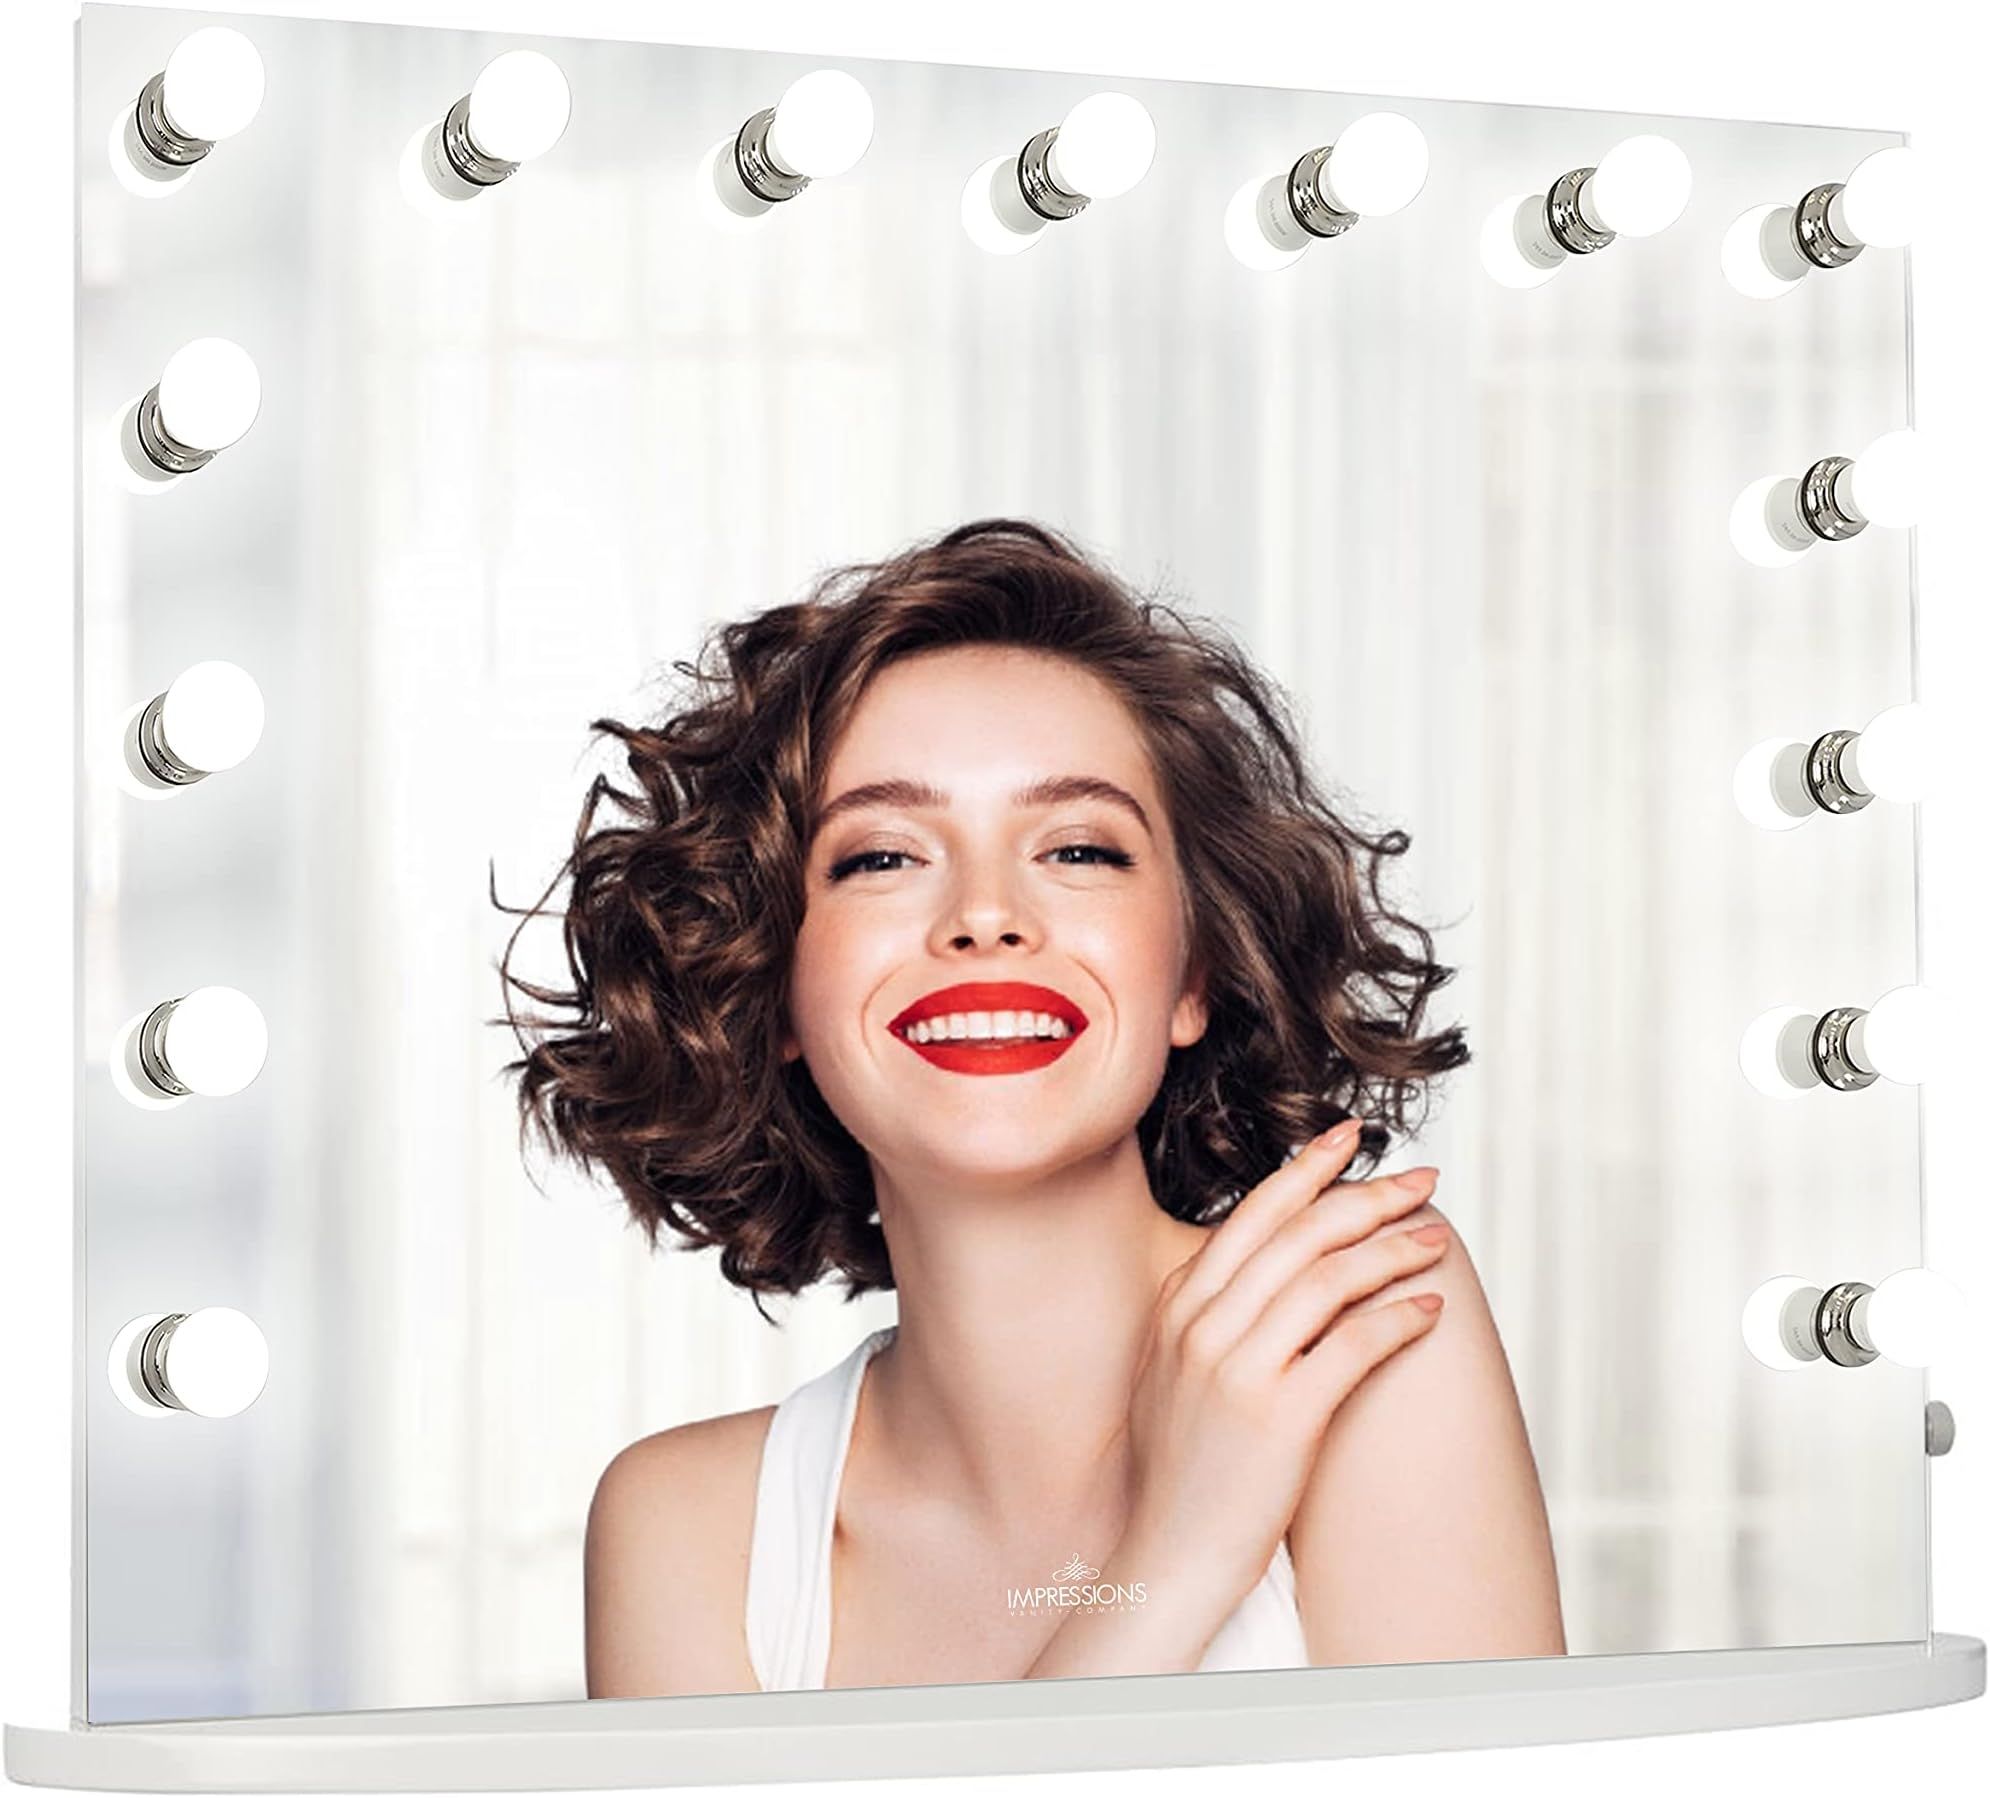 IMPRESSIONS Hollywood Premiere Slim Pro Vanity Mirror with 15 Frosted LED Lights, Dressing Mirror wi | Amazon (US)